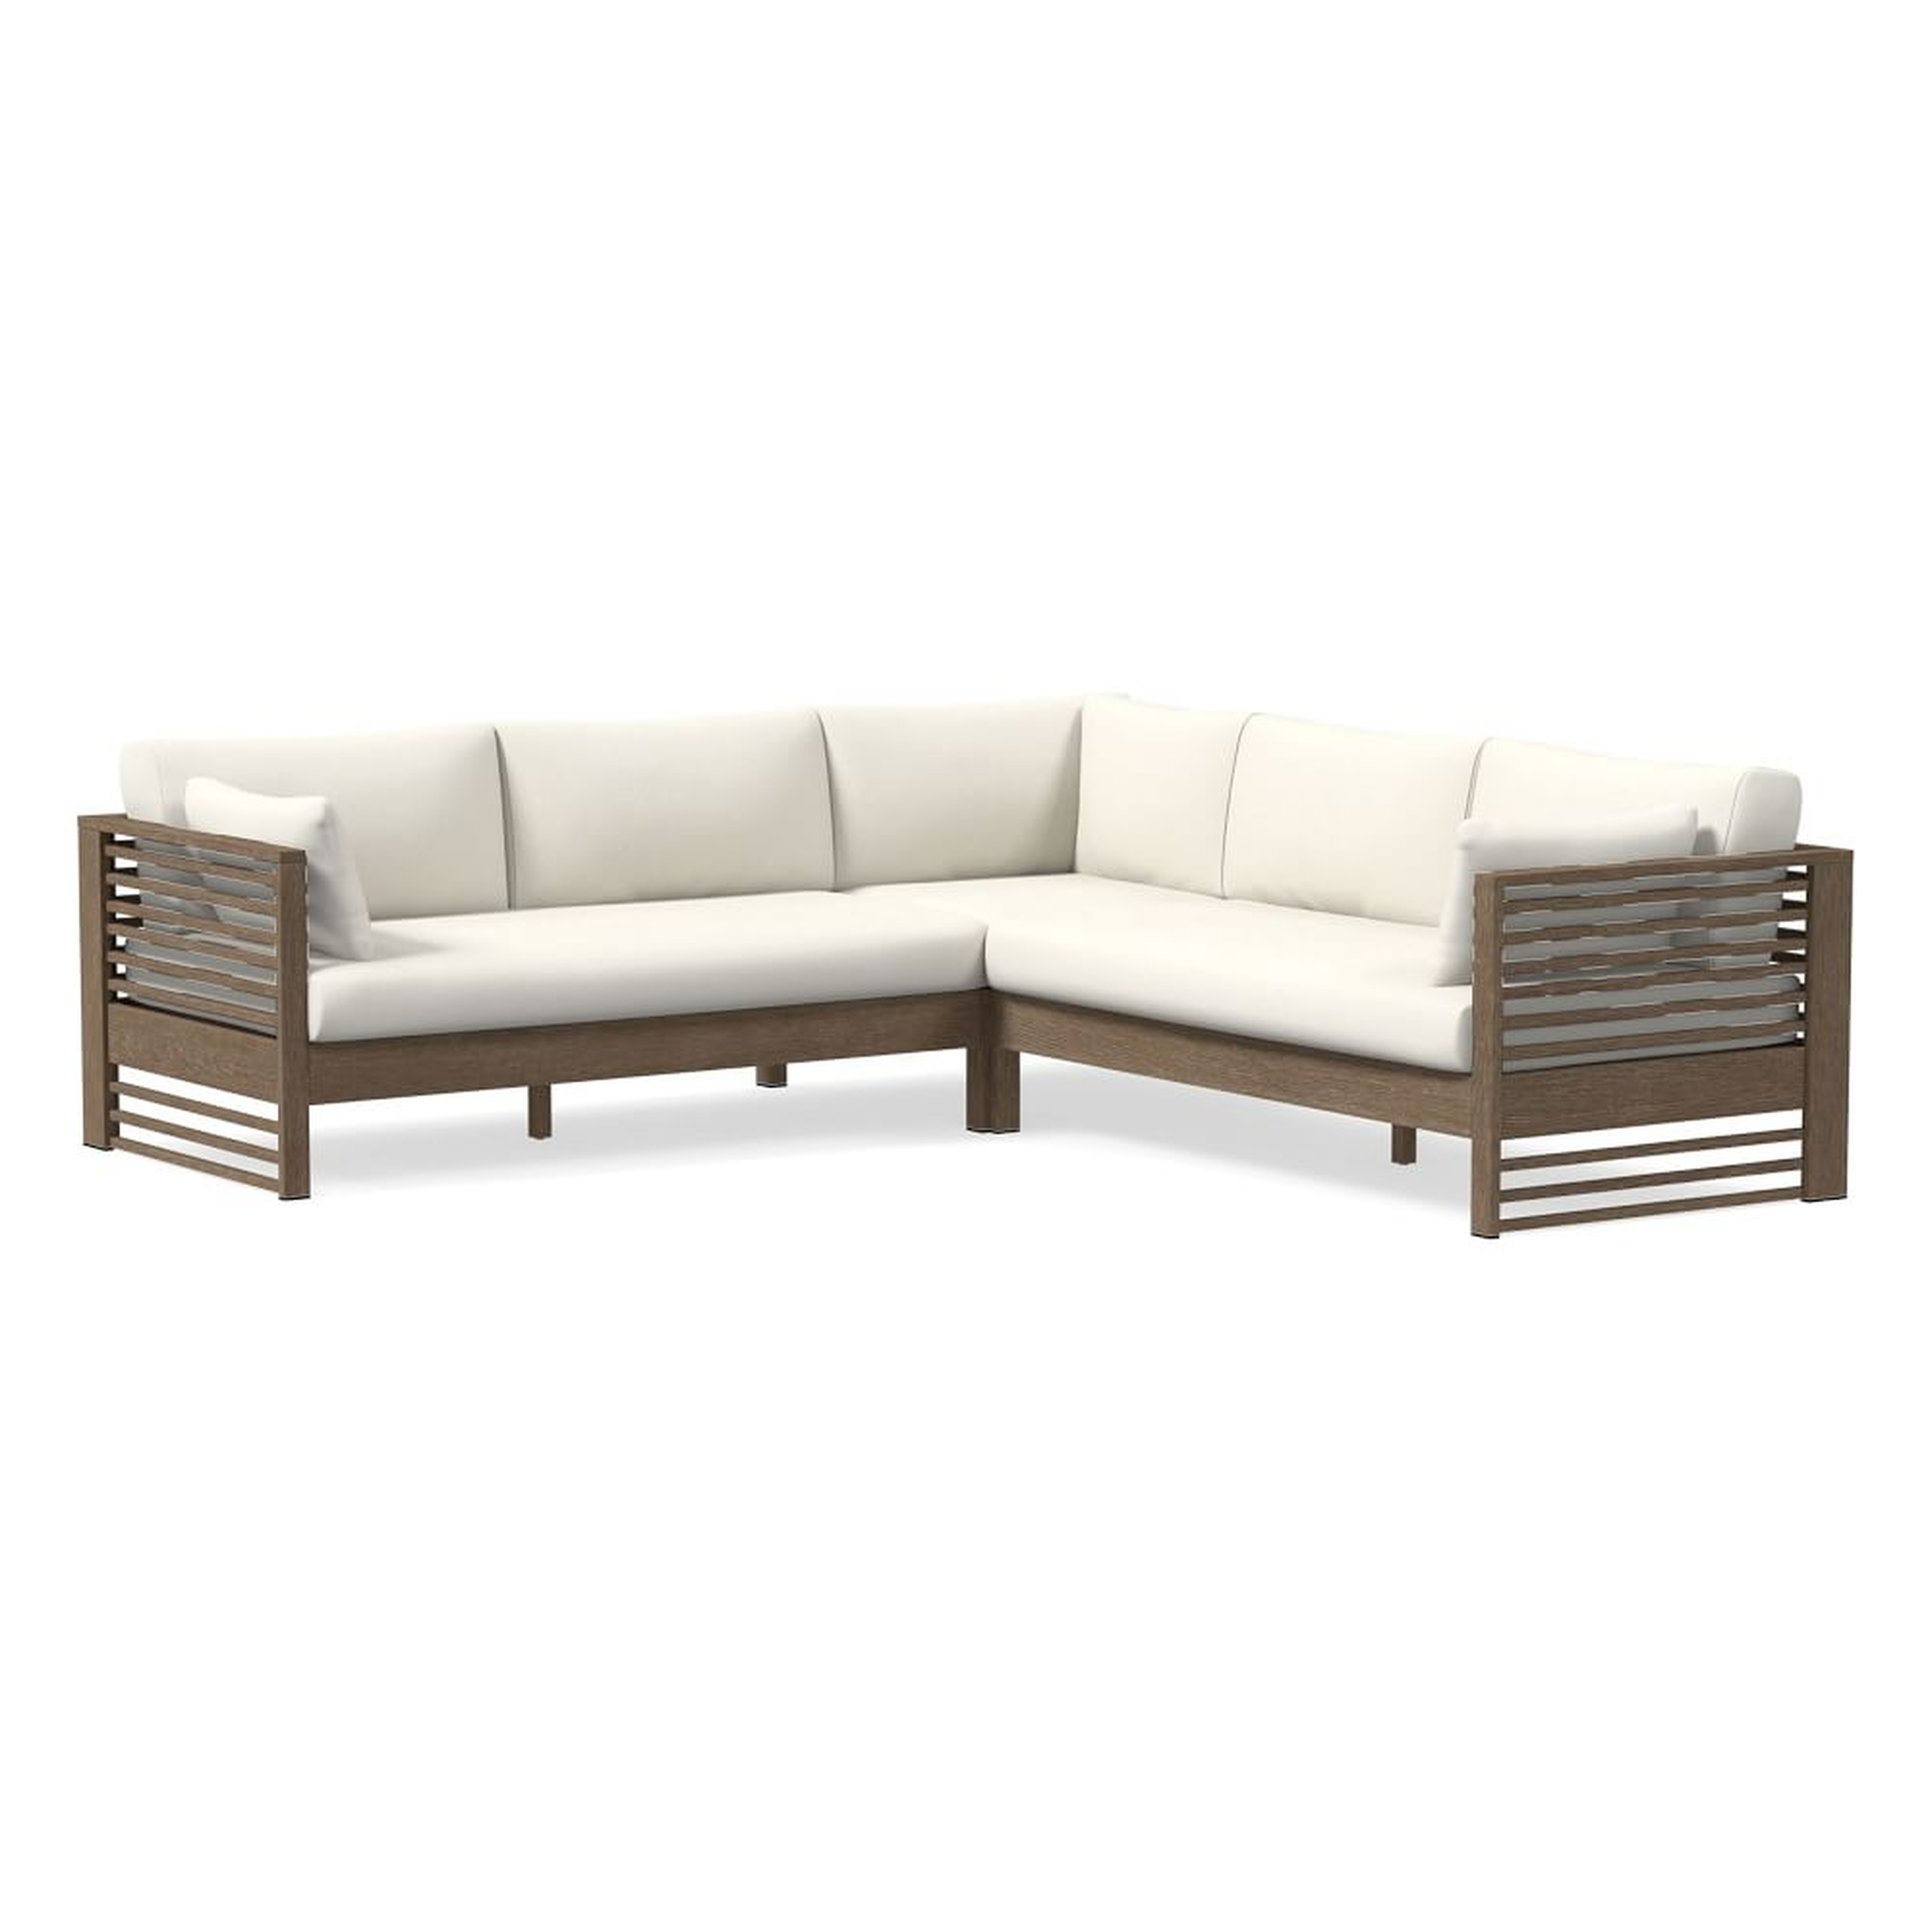 Santa Fe Slatted Collection, 3 Piece Sectional Set Cushion Cover, Sunbrella Piazza, White - West Elm